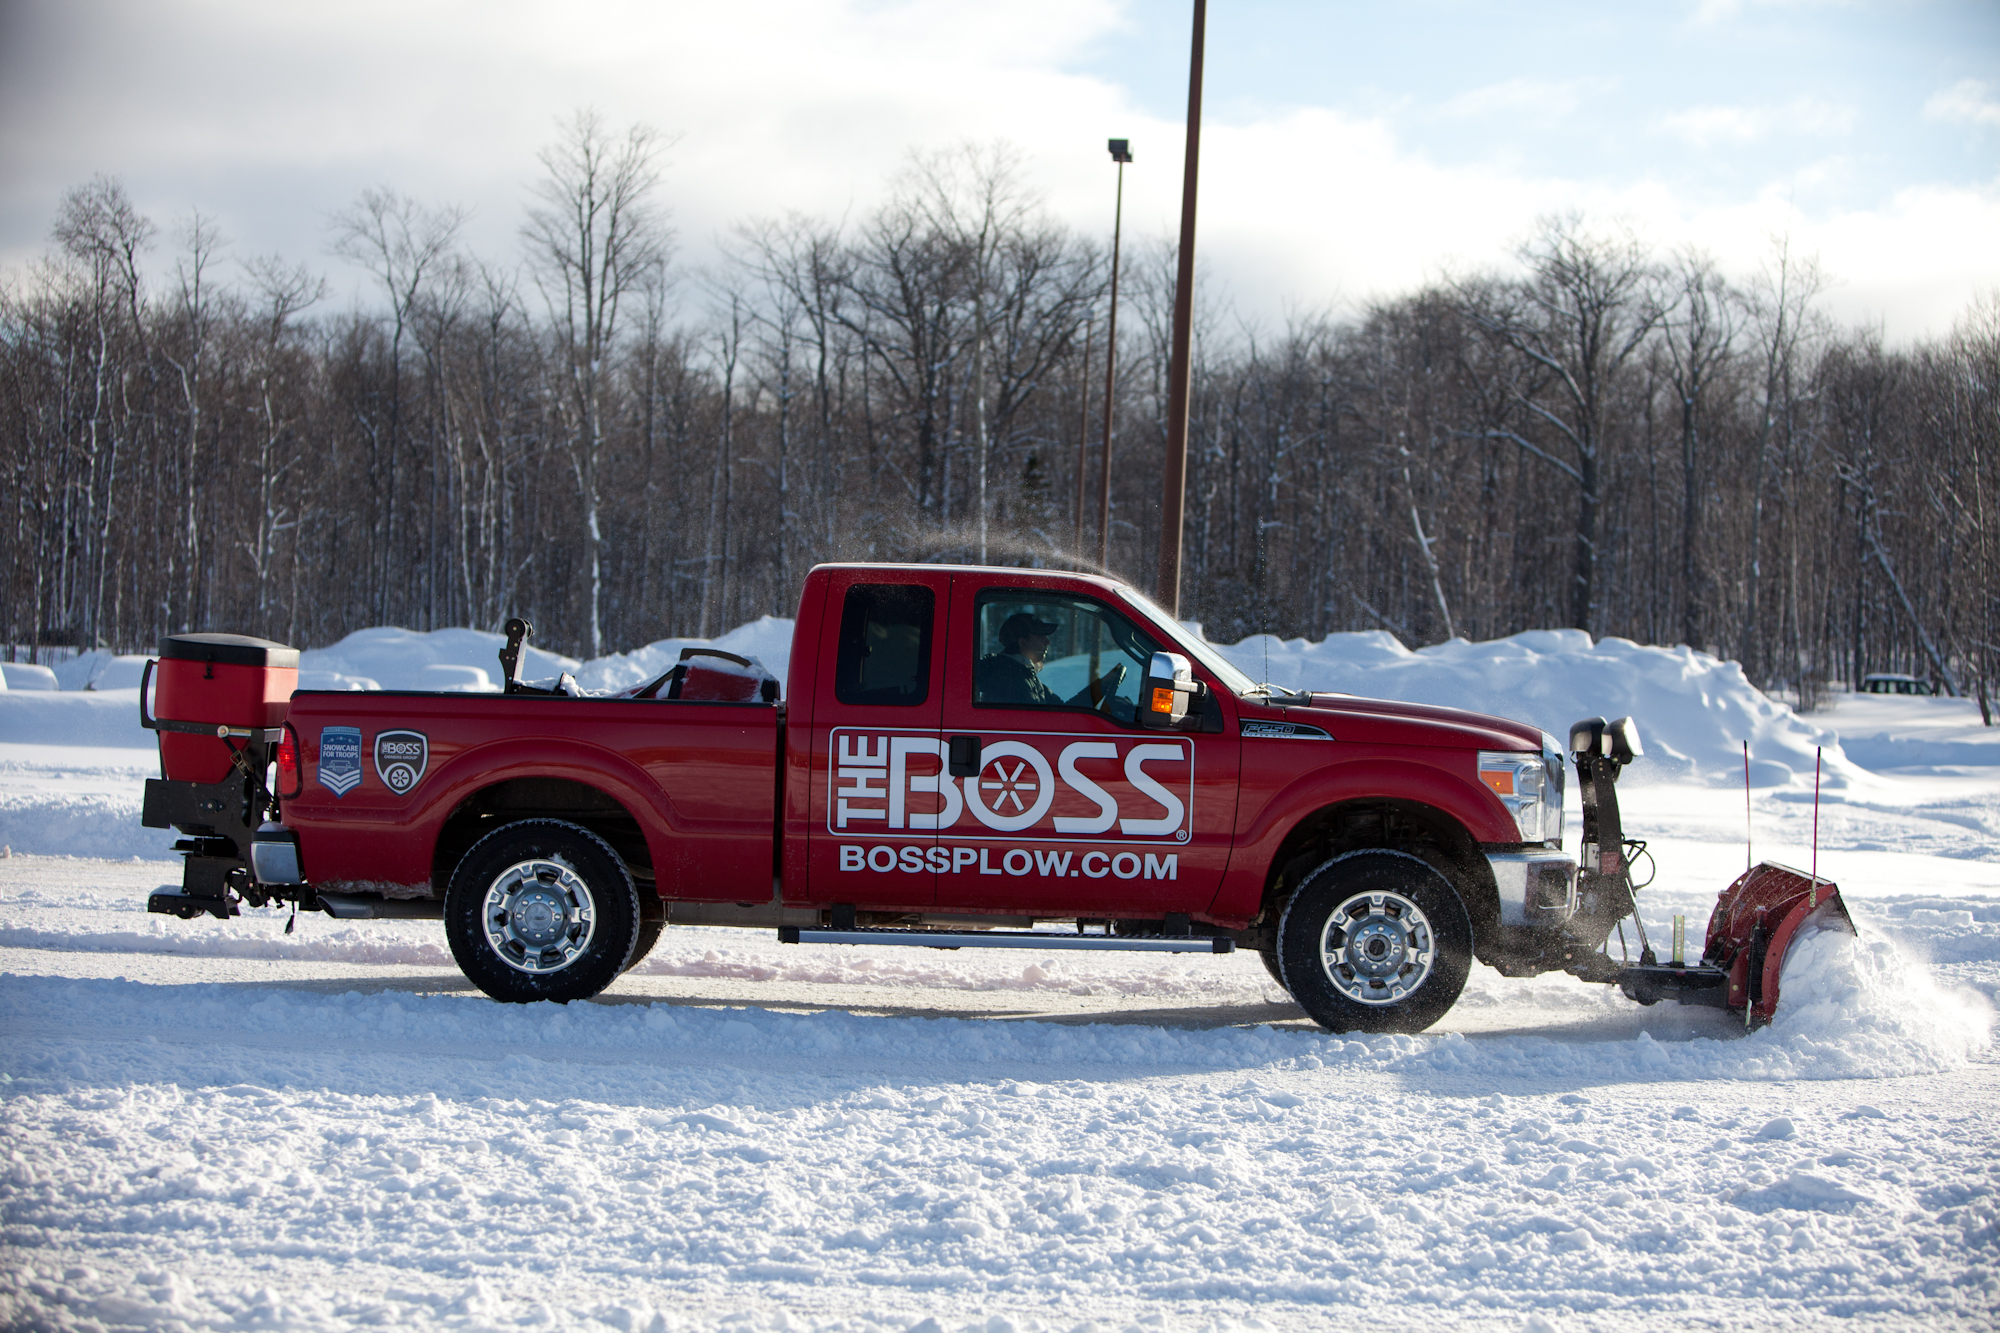 Boss Plow with Truck